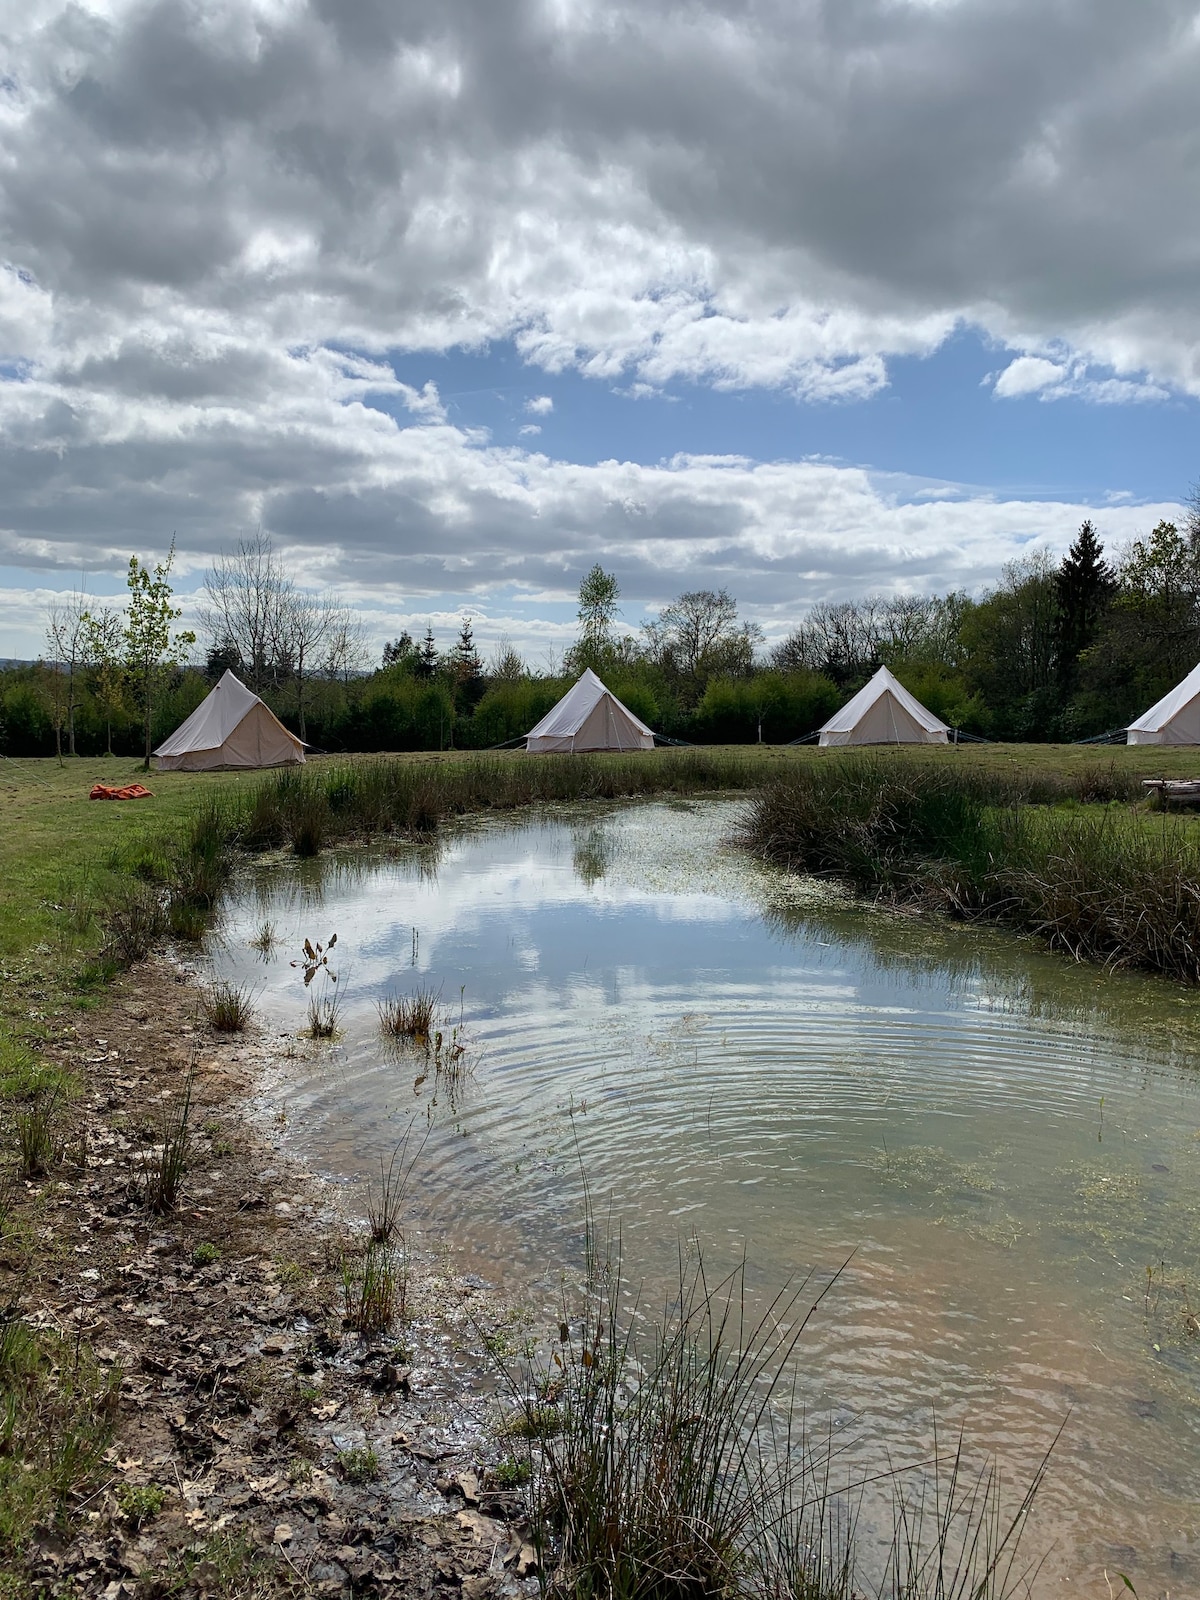 15 Bell Tents with double beds